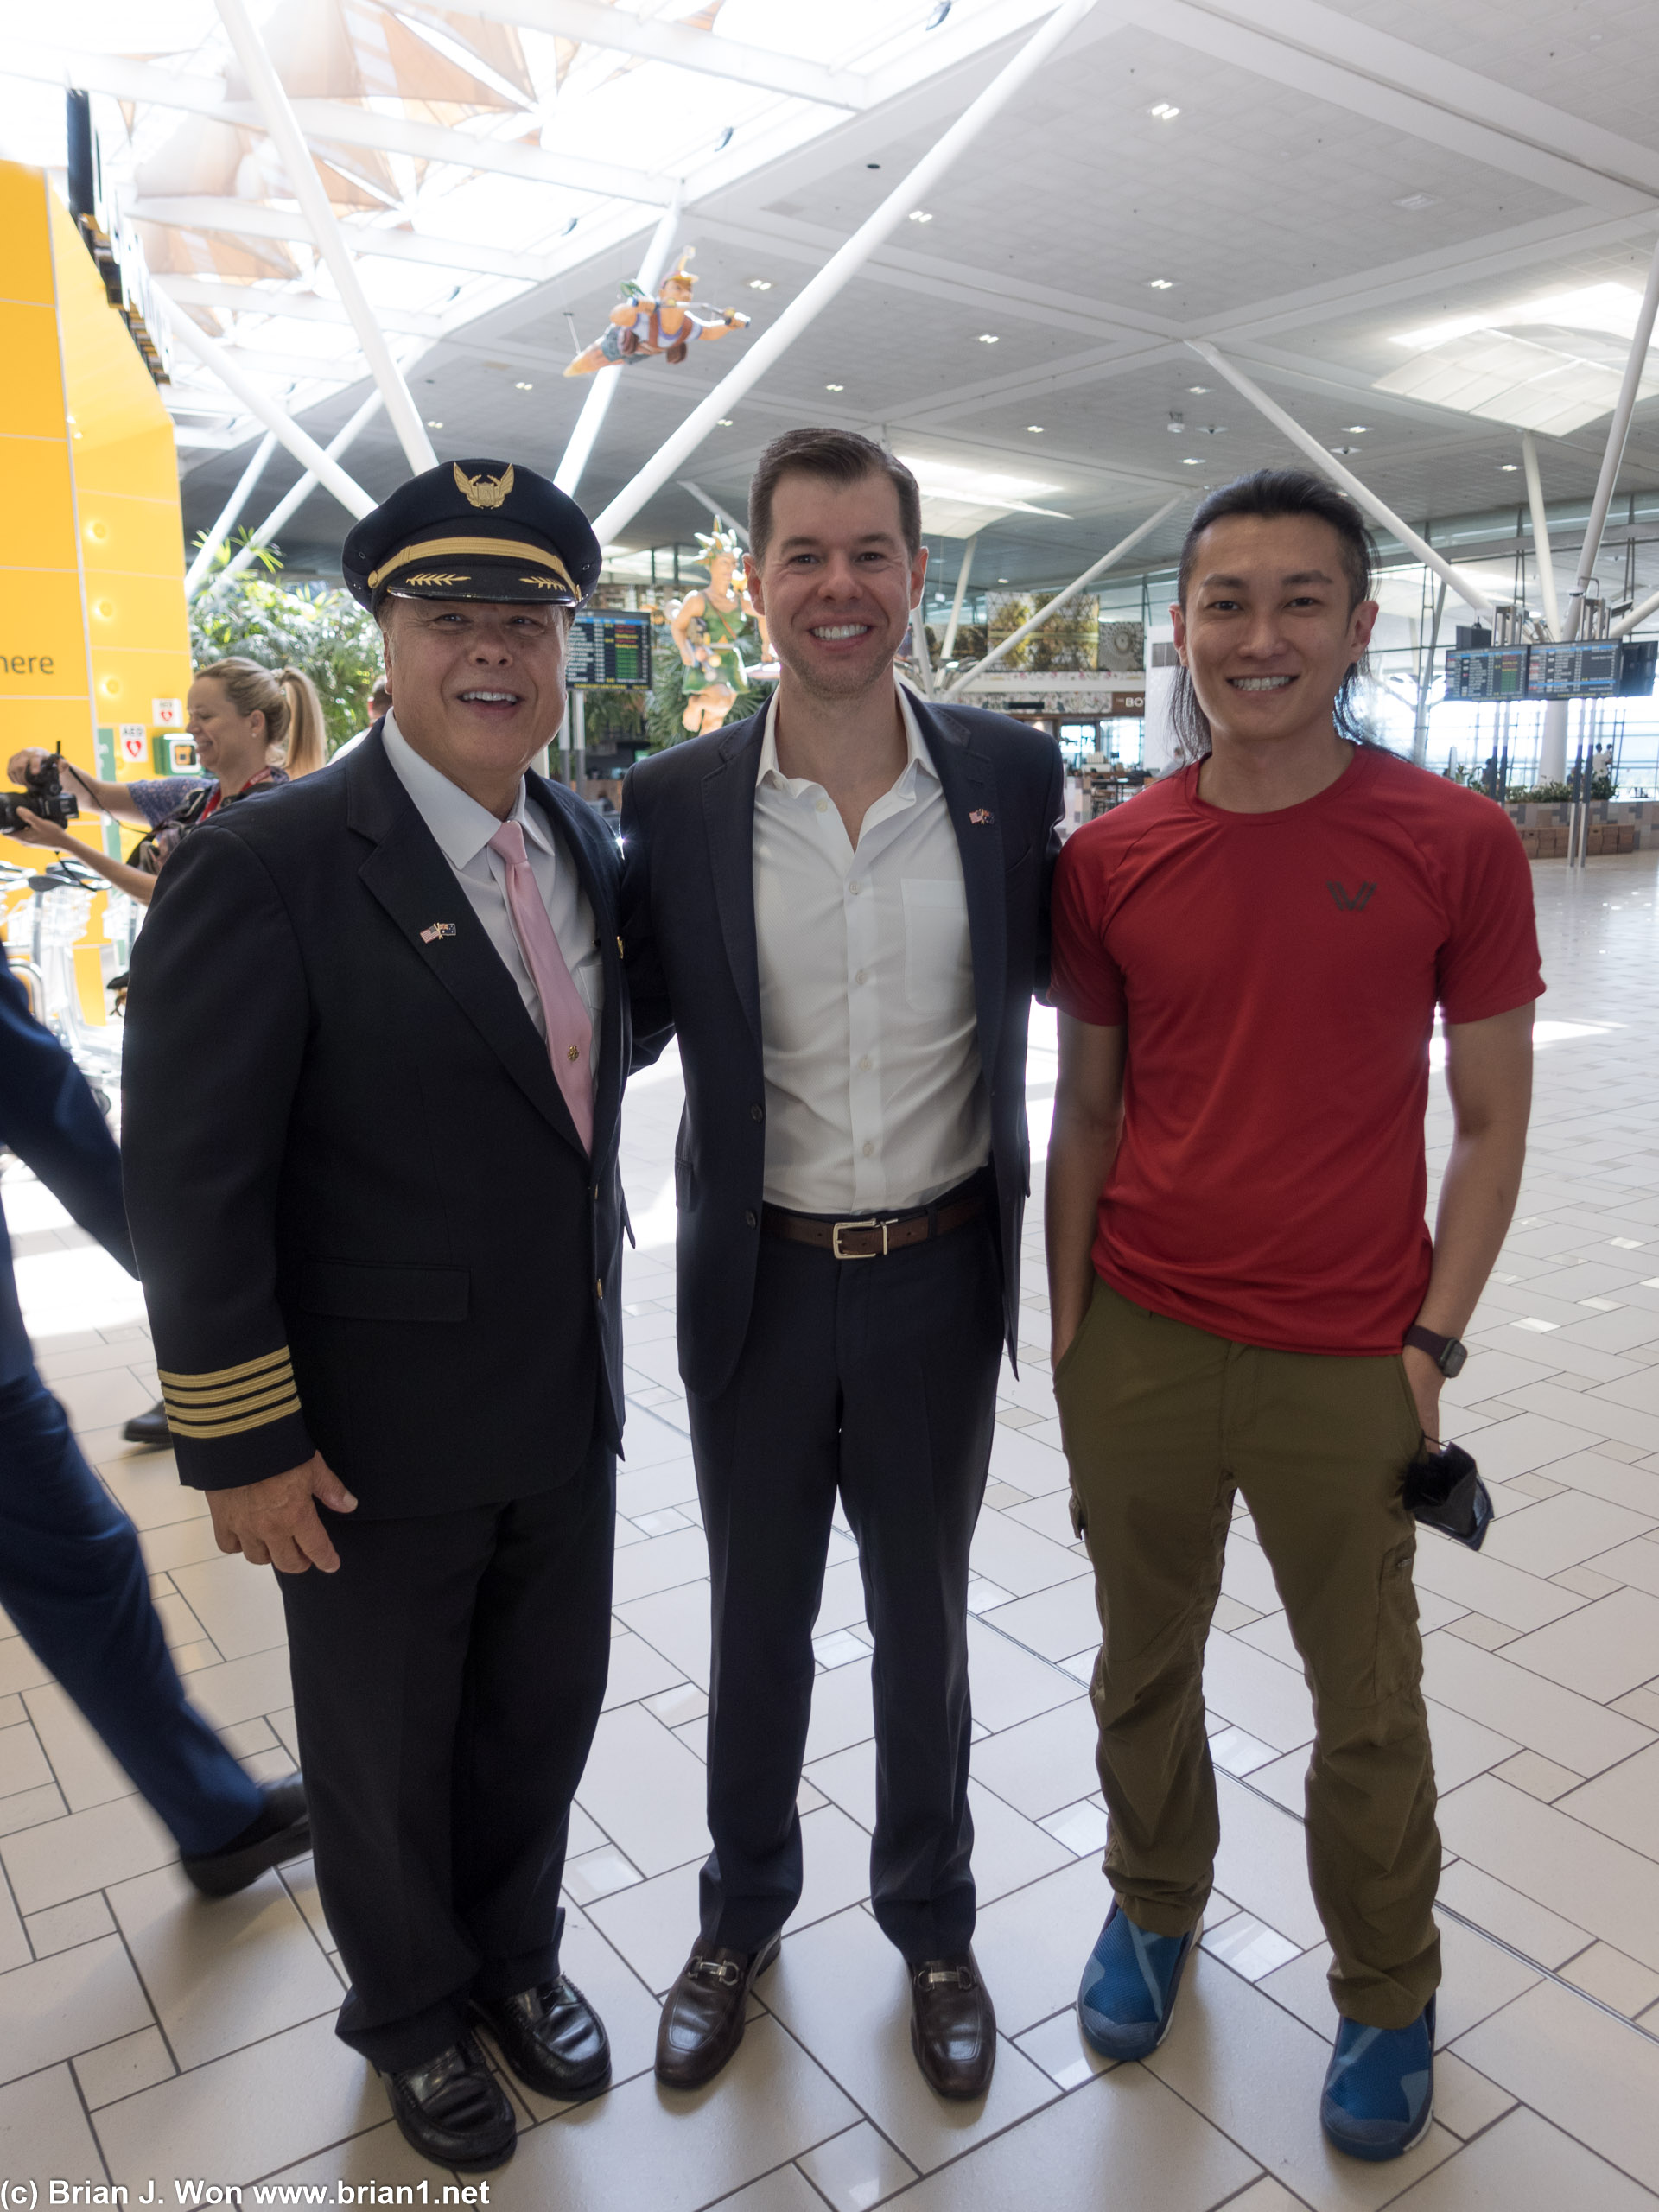 Carl Brothers' turn for a picture with United SVP Patrick Quayle and Captain Horanyi.